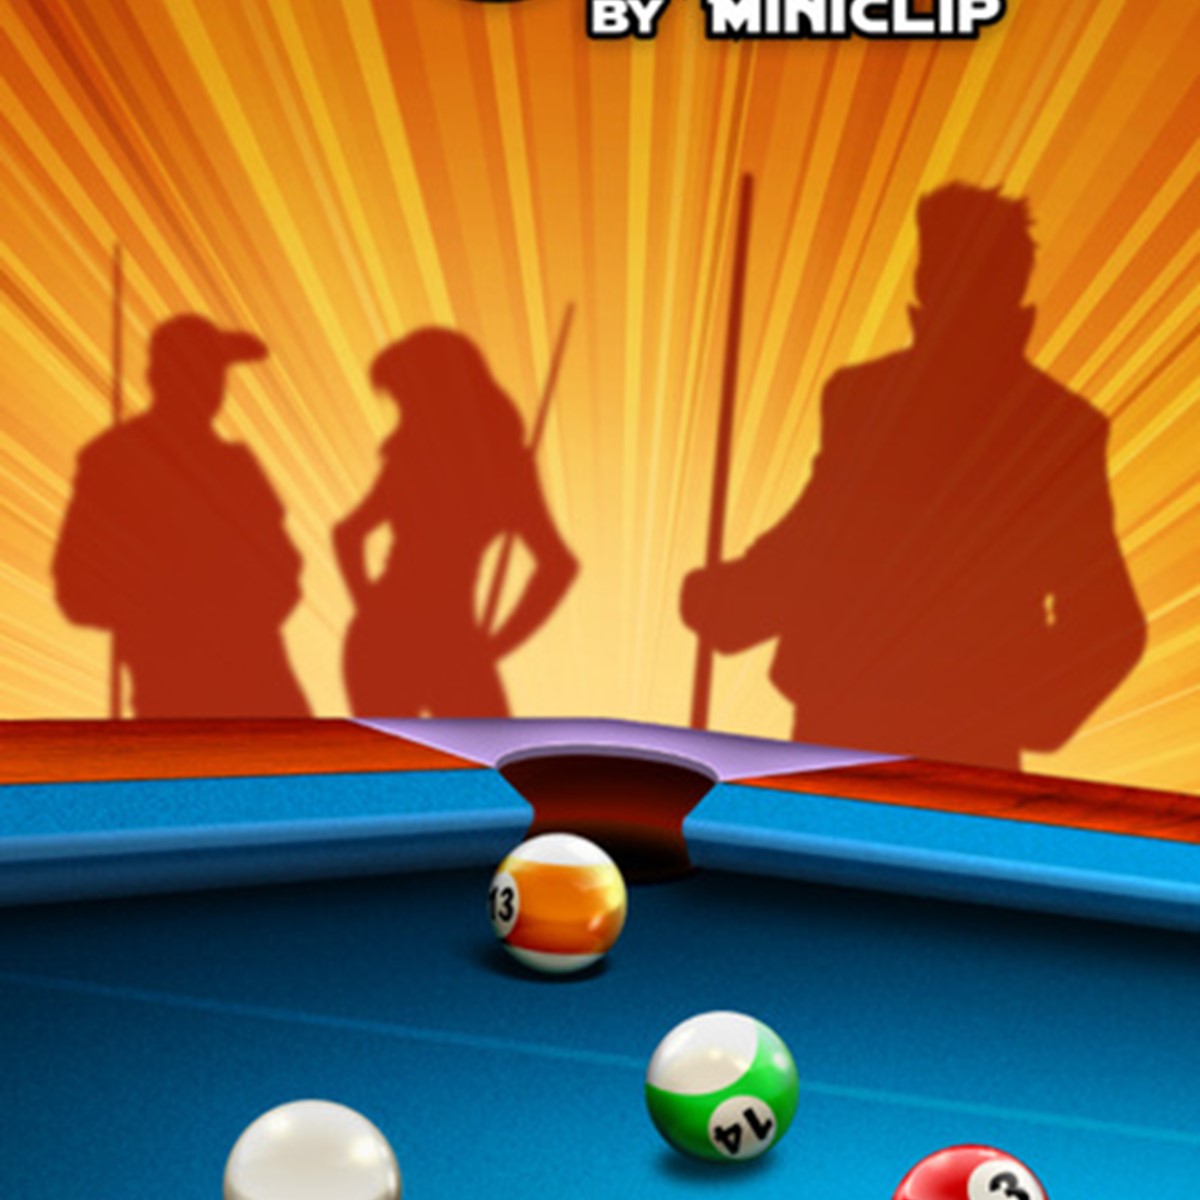 How Do I Pause The Game On My Ipad Eight Ball Pool By ...